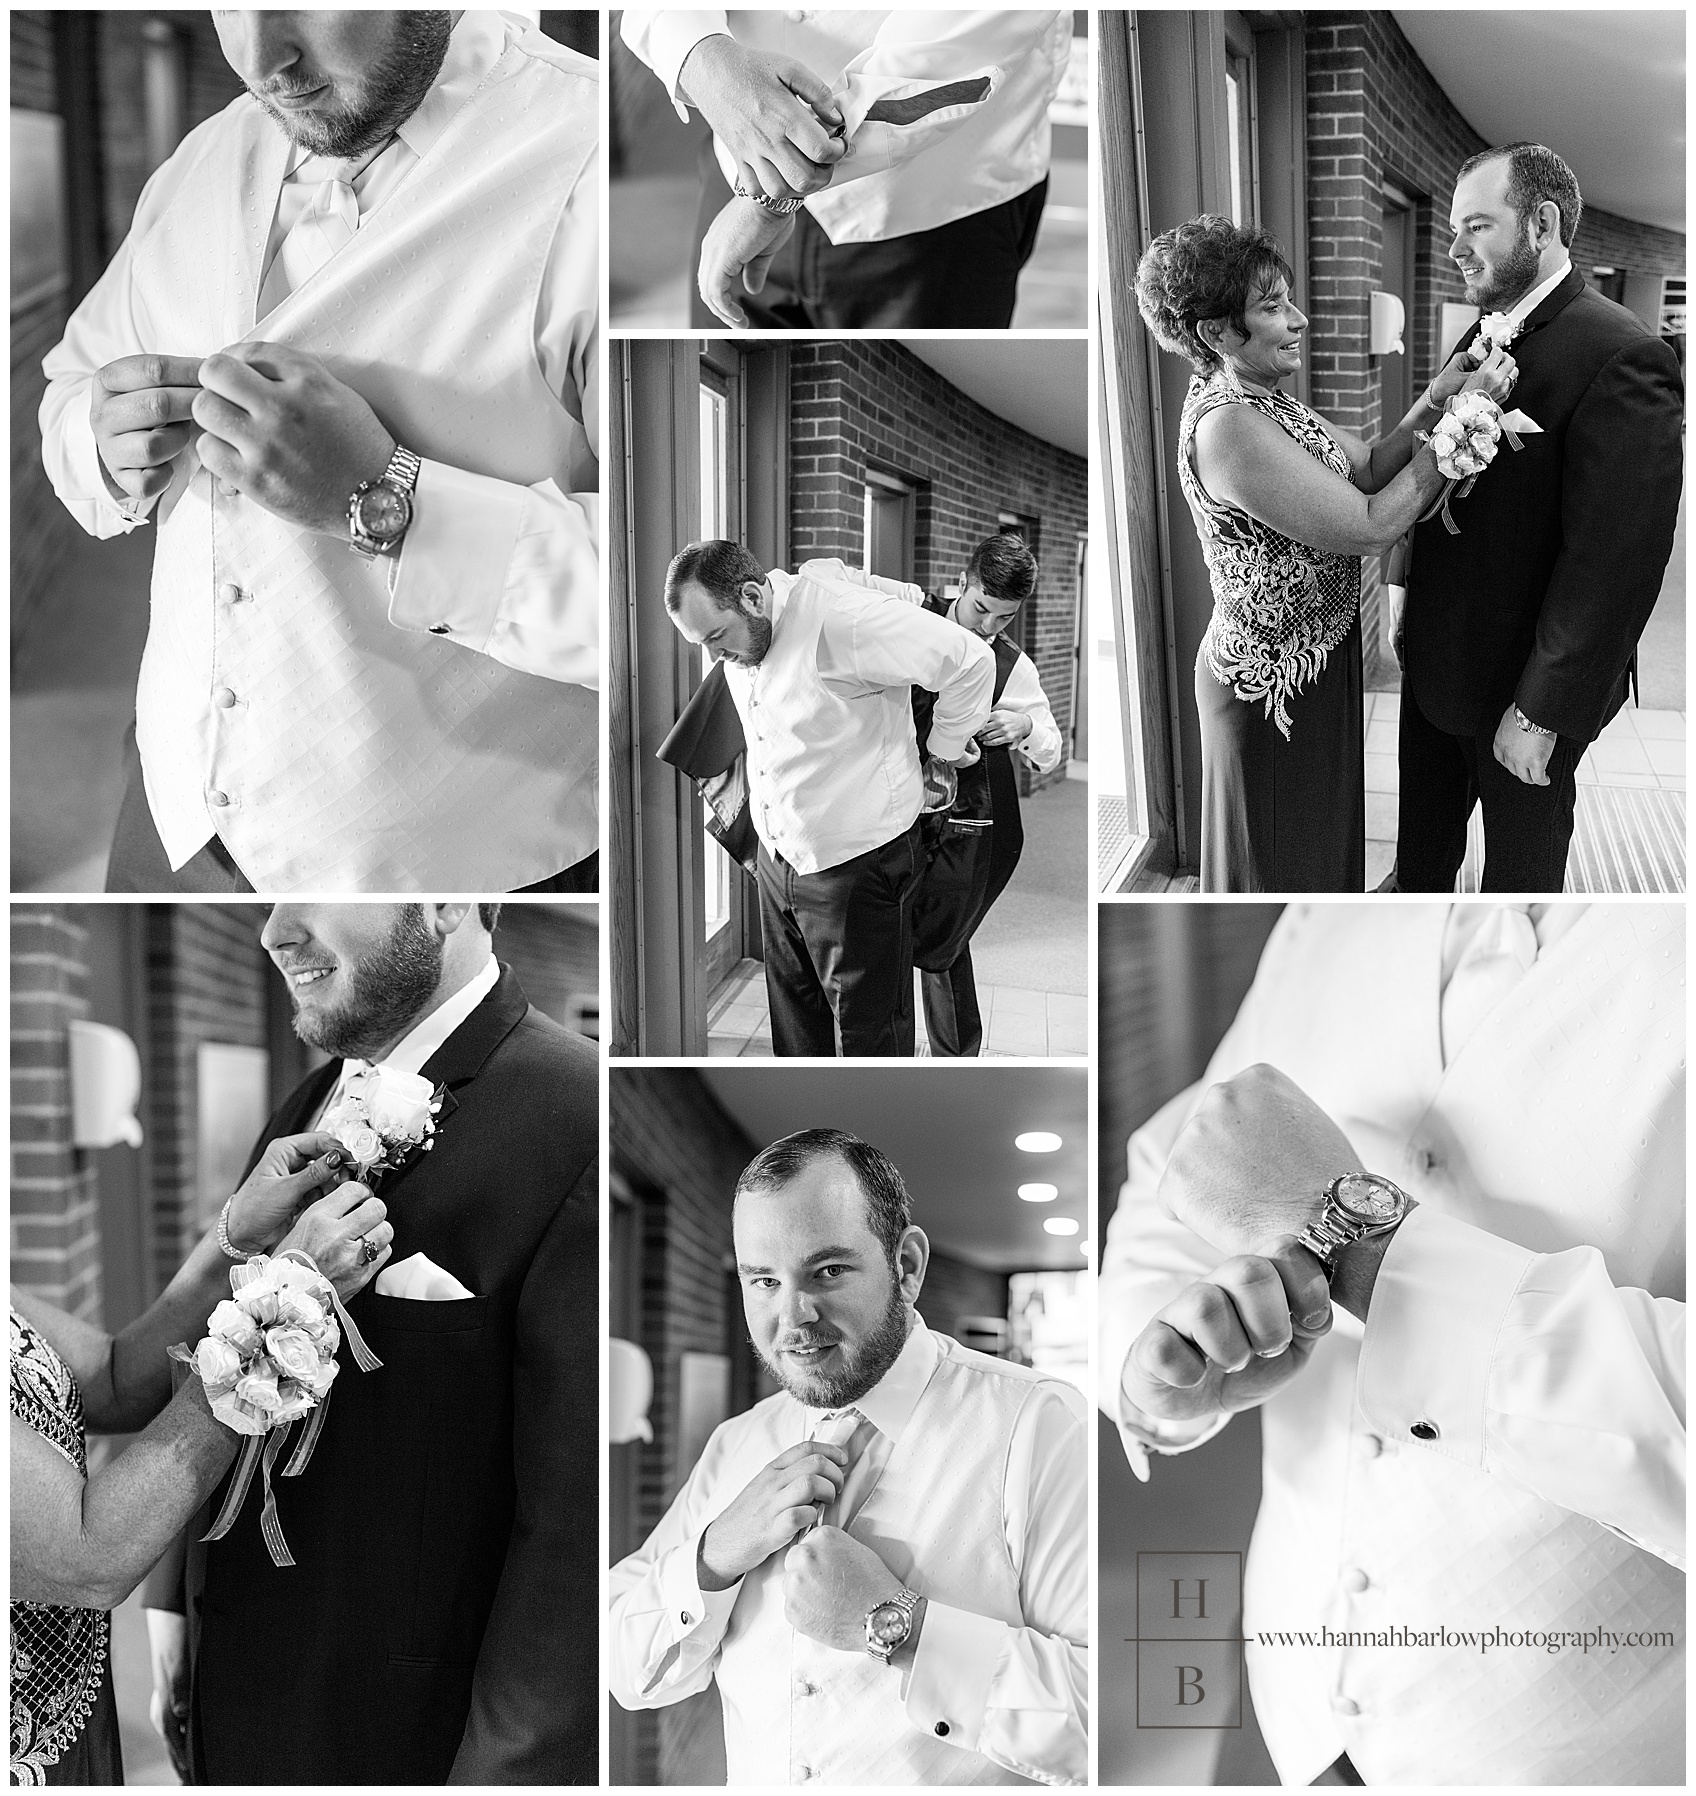 Black and White Photos of Groom Getting Ready St. Paul Church Weirton WV